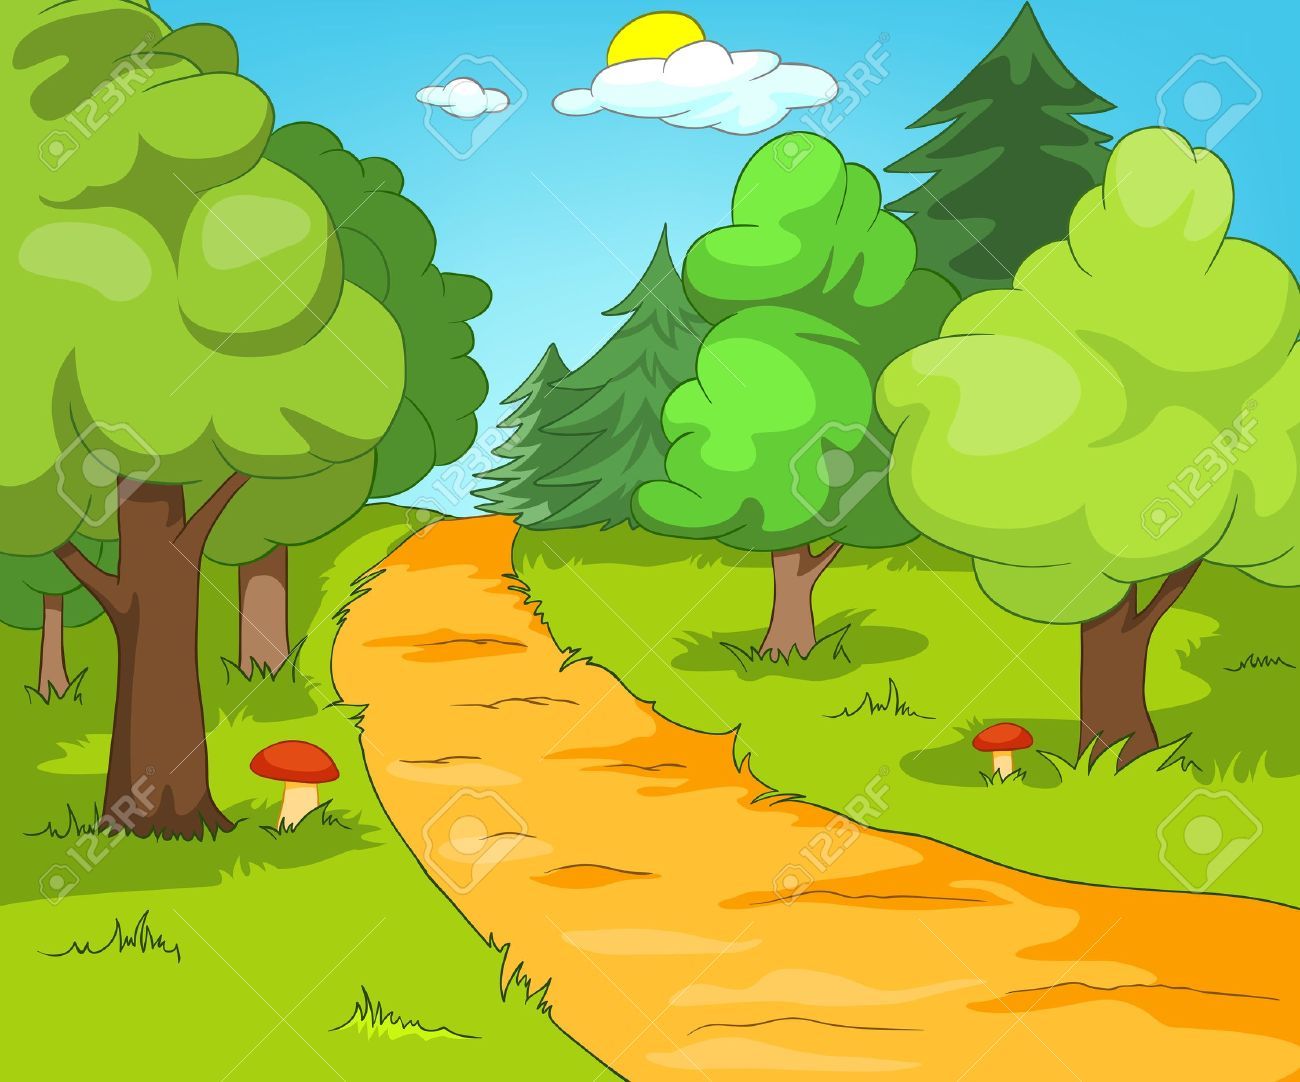 Free background vector.